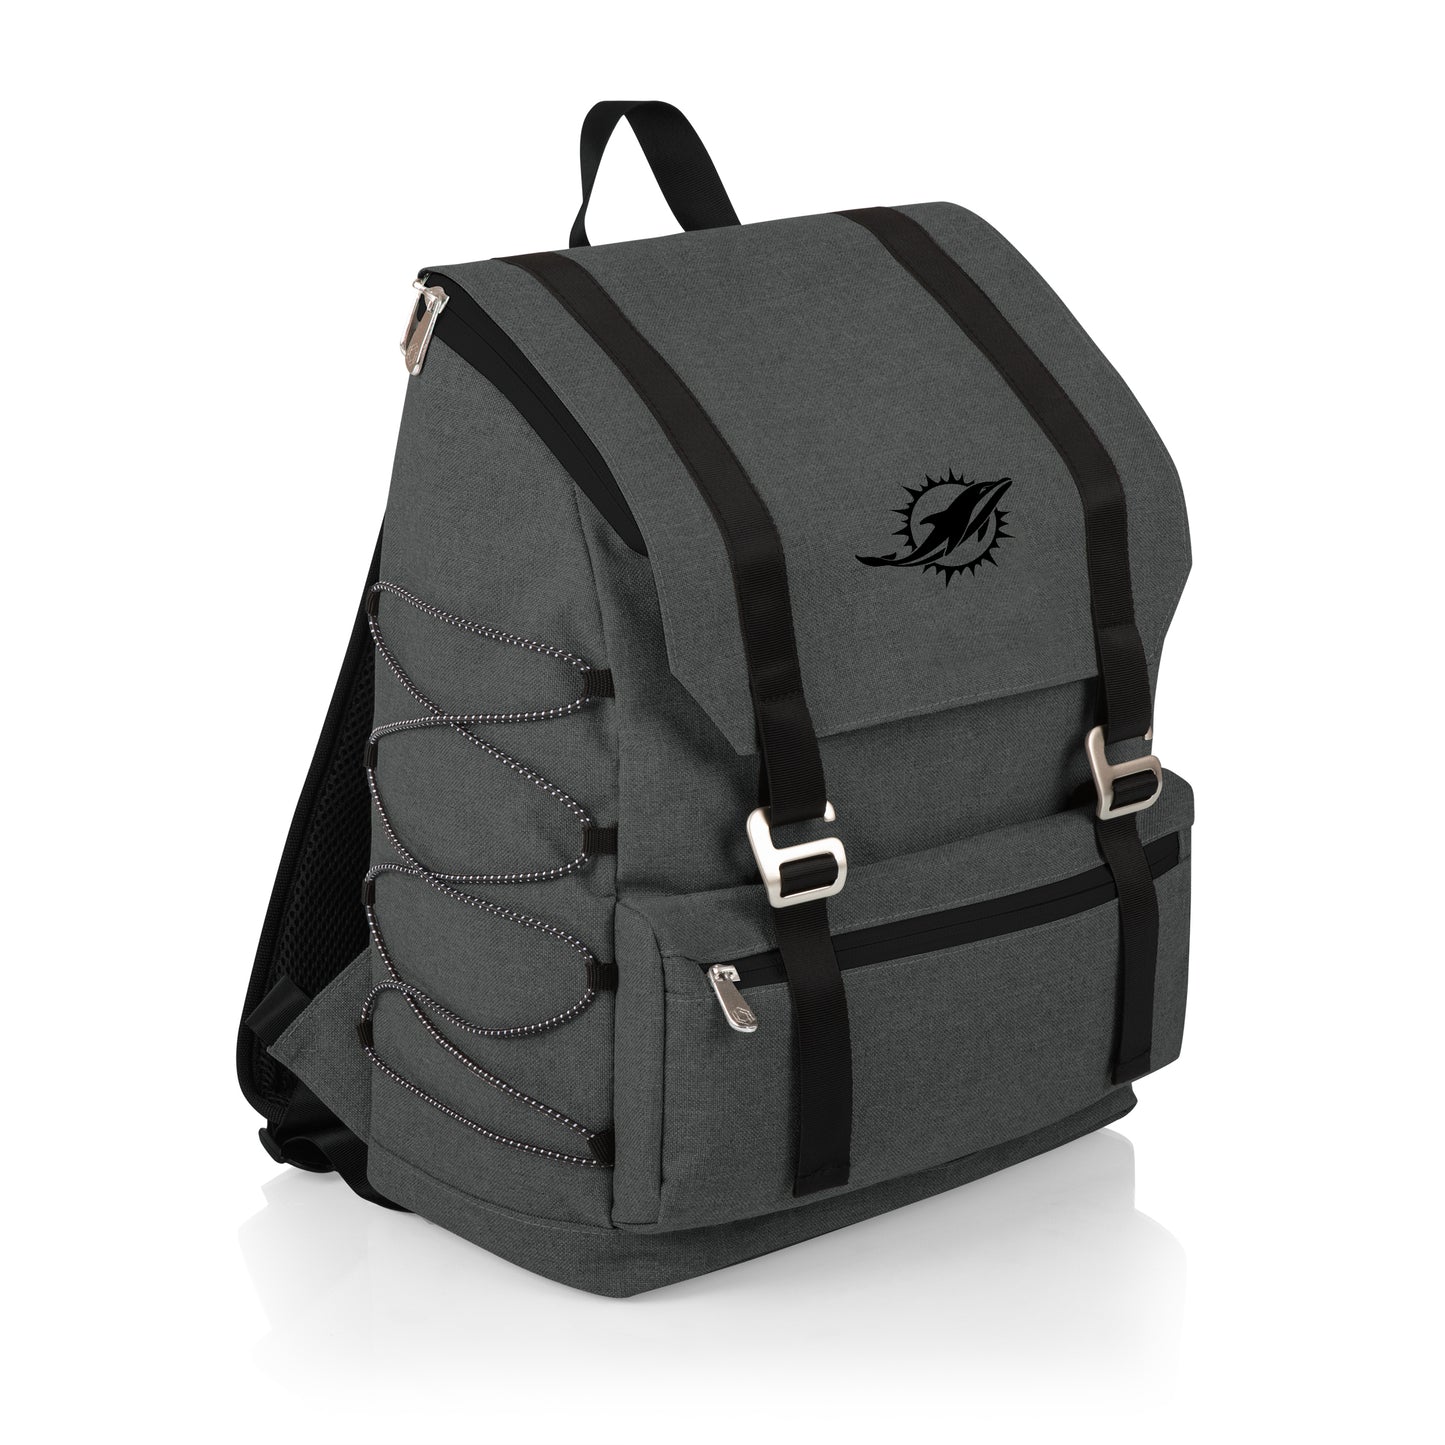 Miami Dolphins - On The Go Traverse Cooler Backpack